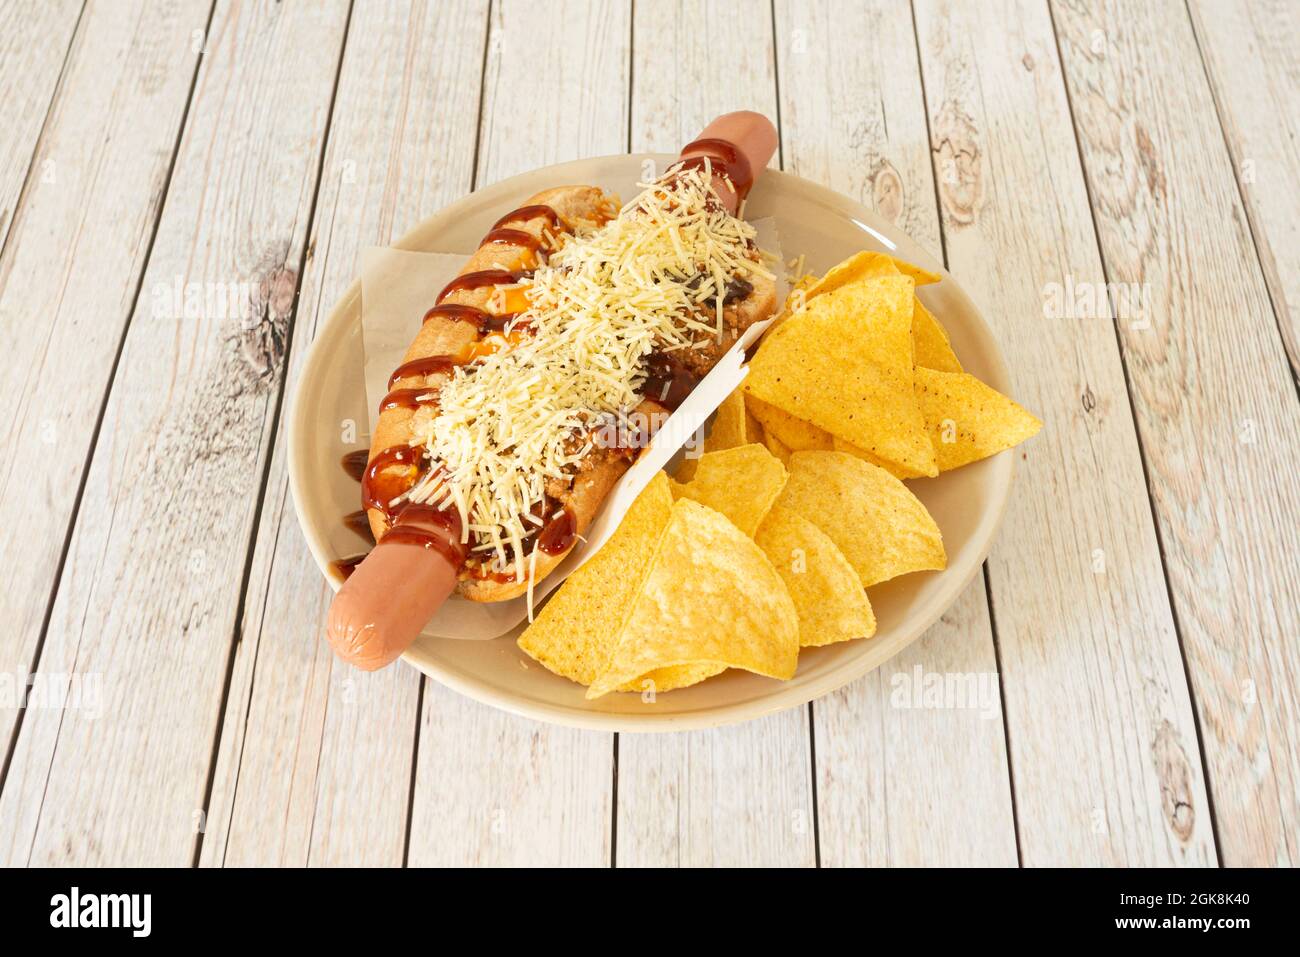 Spicy hot dog with chili, barbecue sauce, grated cheese and corn chips Stock Photo